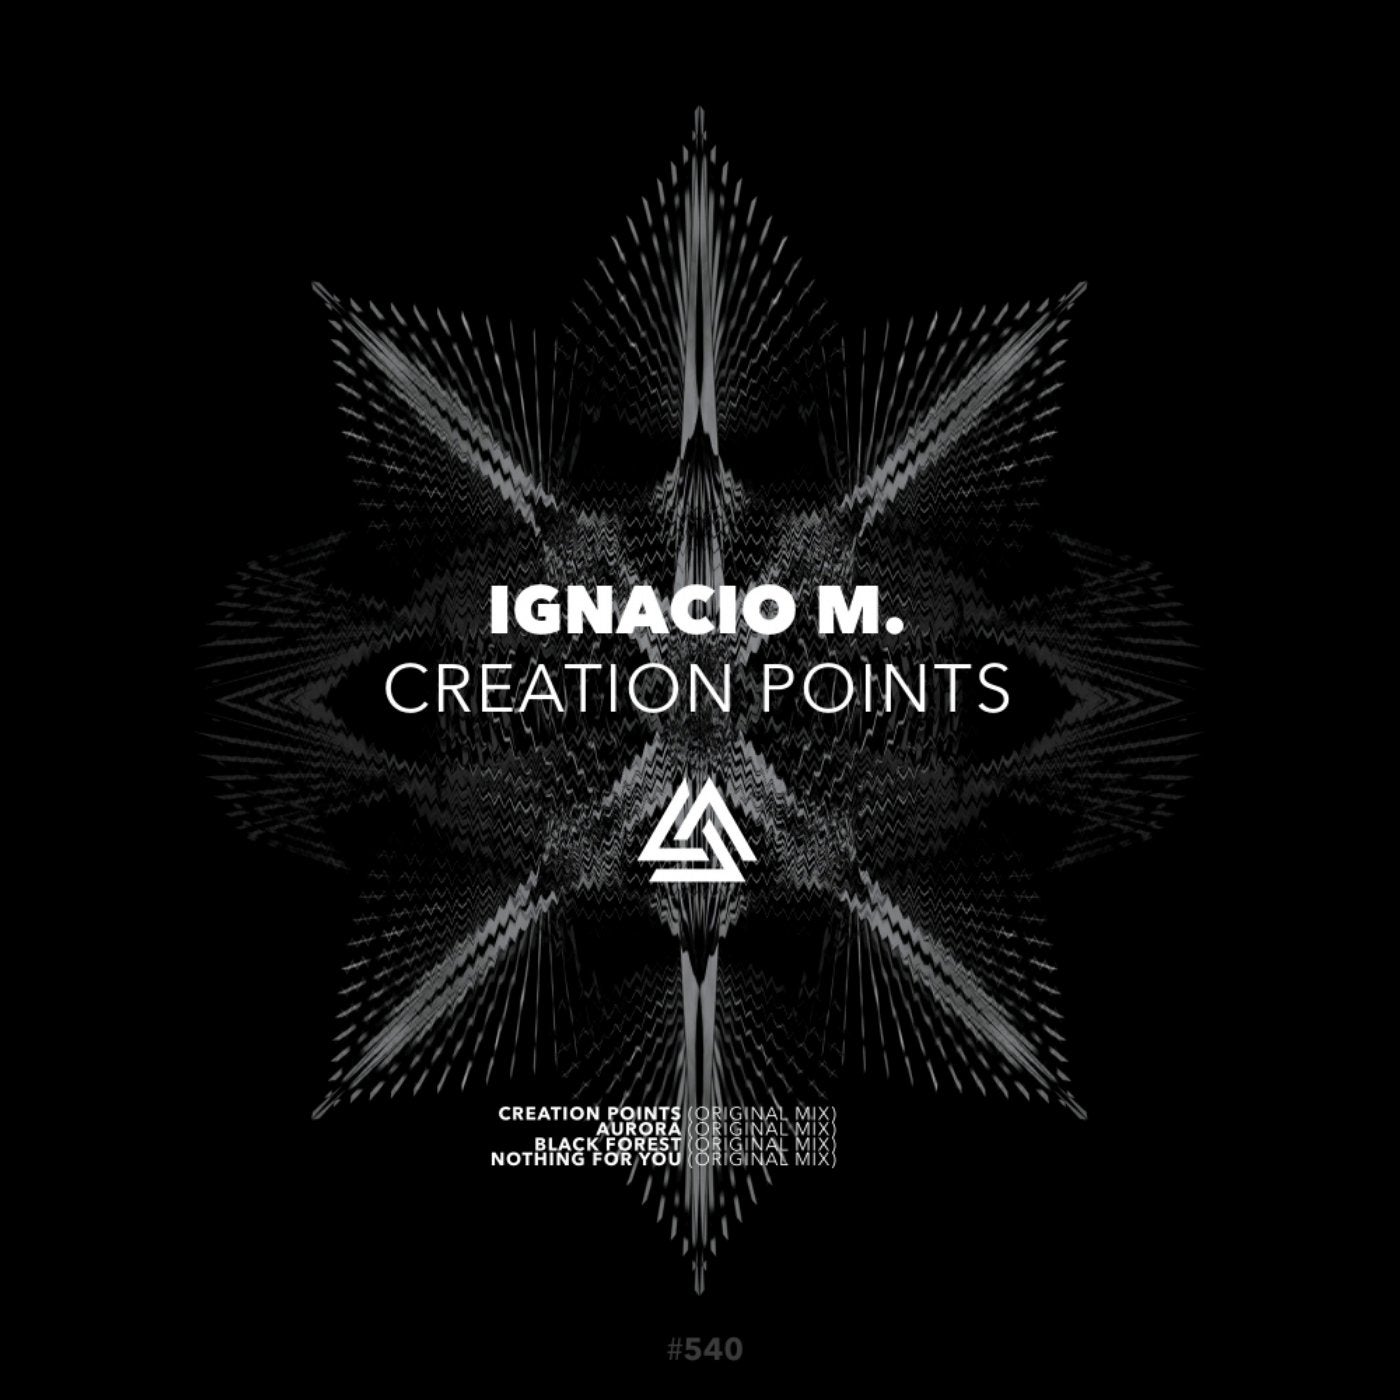 Creation Points